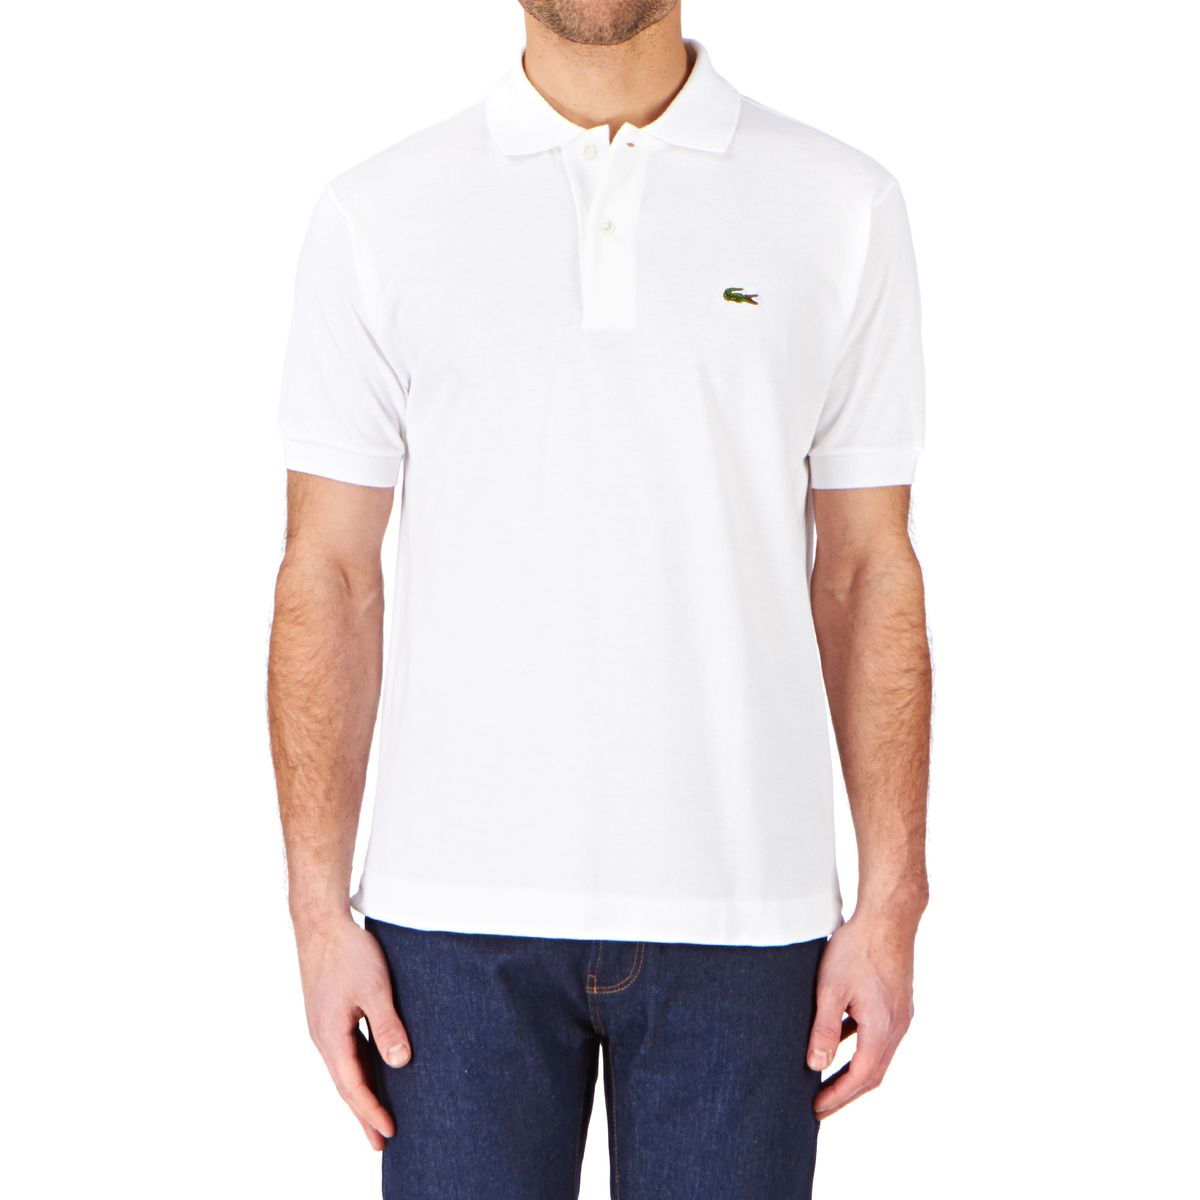 Lacoste L.12.12 Polo Shirt - White | Free UK Delivery* on All Orders